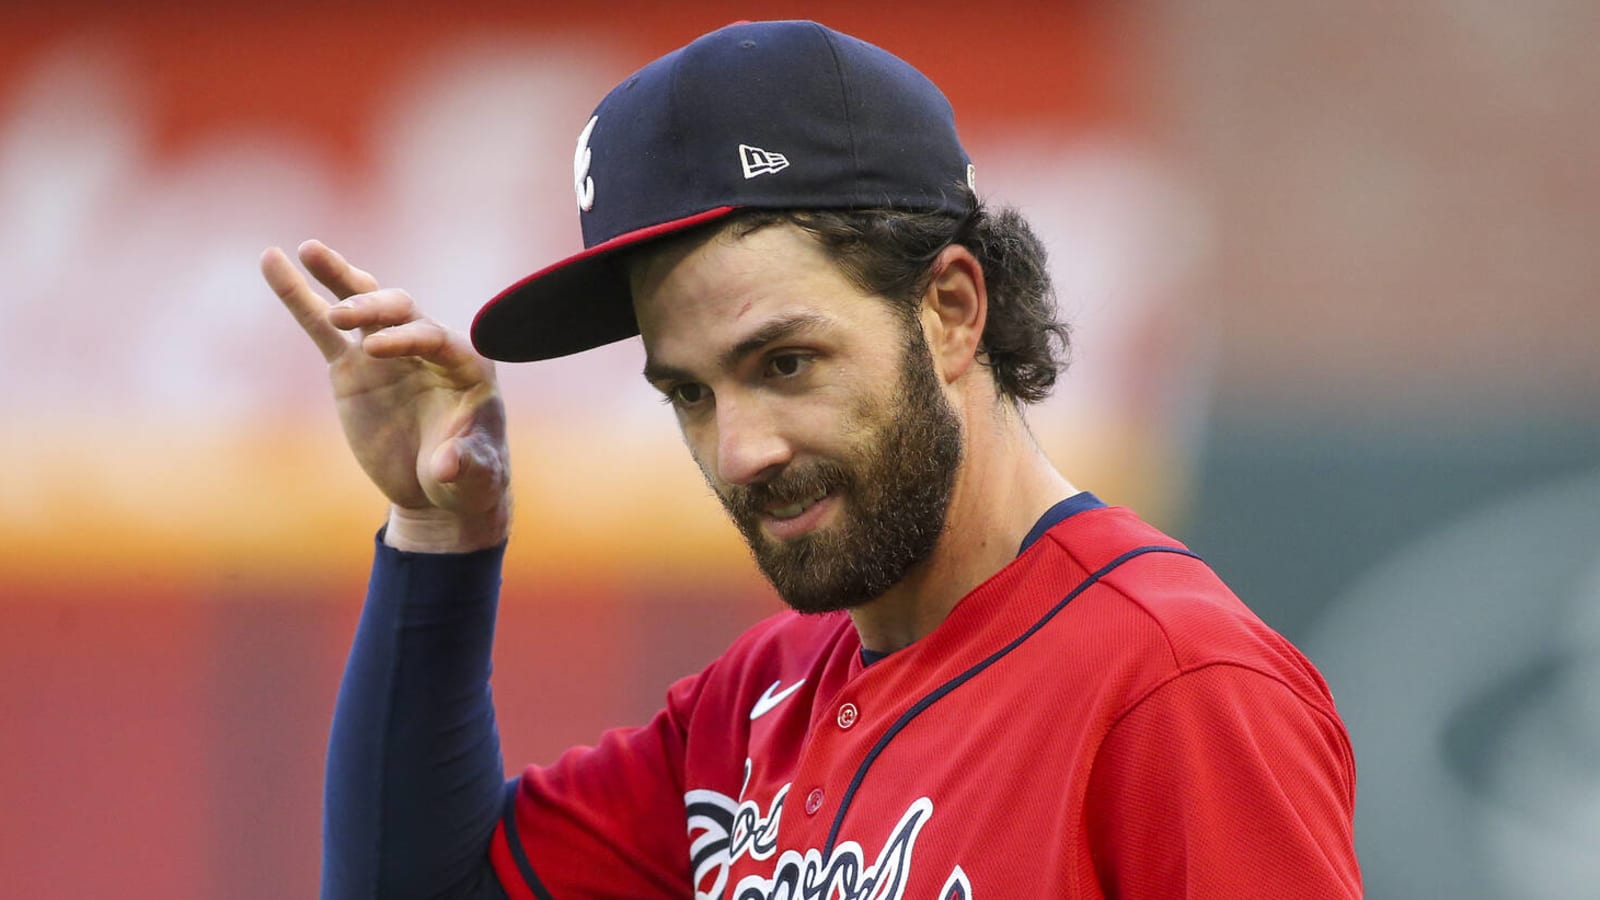 Dansby Swanson bids farewell to Braves with social media message